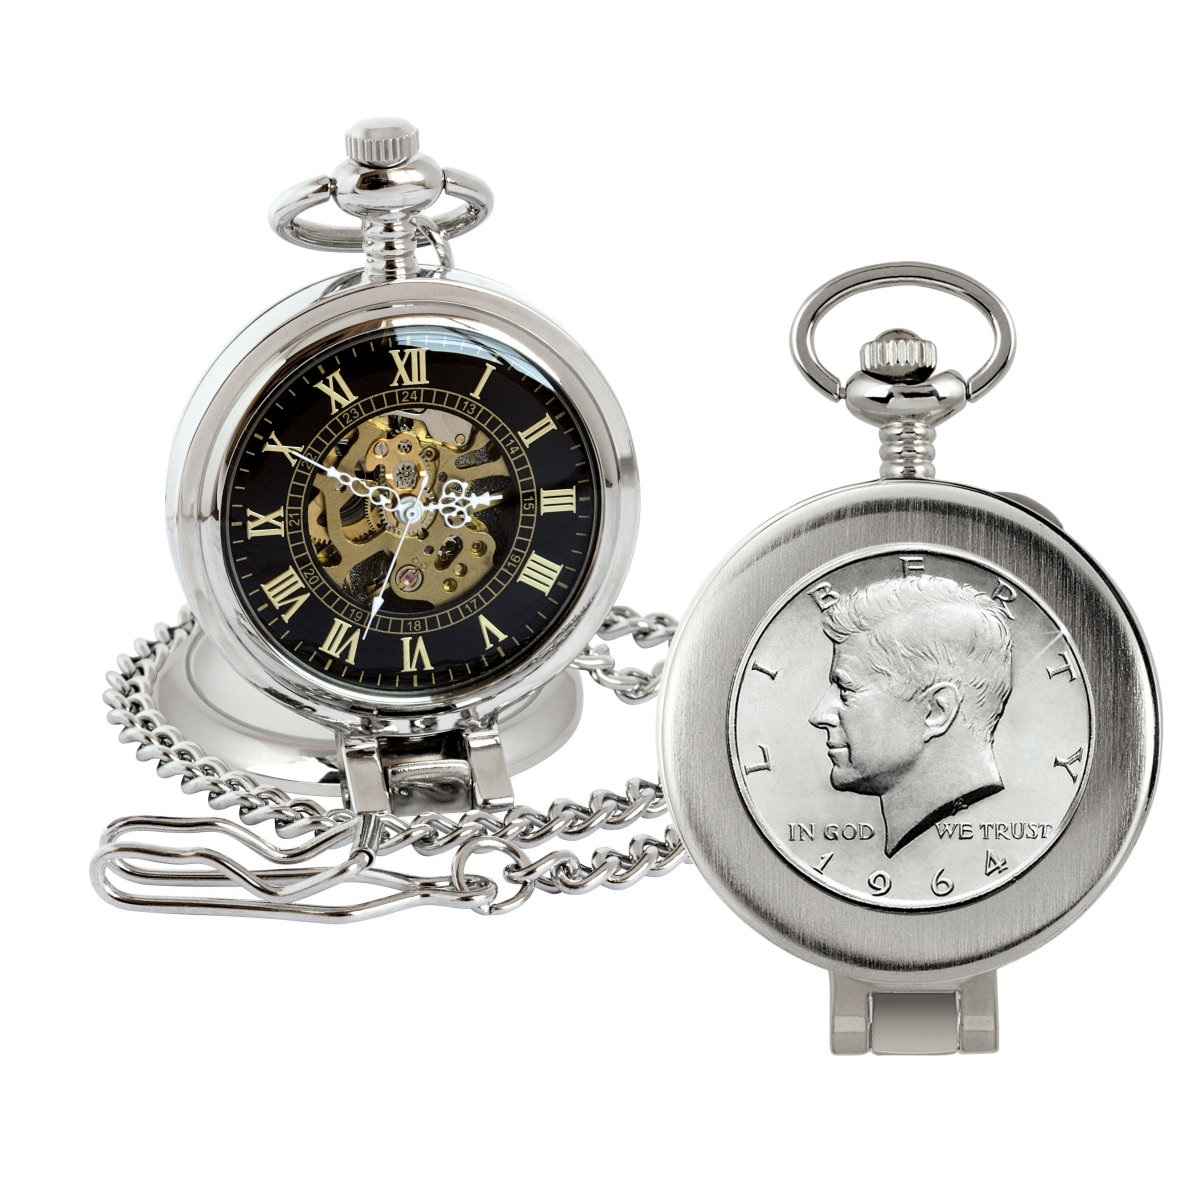 Picture of American Coin Treasures 16267 JFK 1964 First Year of Issue Half Dollar Coin Pocket Watch with Skeleton Movement, Black Dial with Gold Roman Numerals - Magnifying Glass